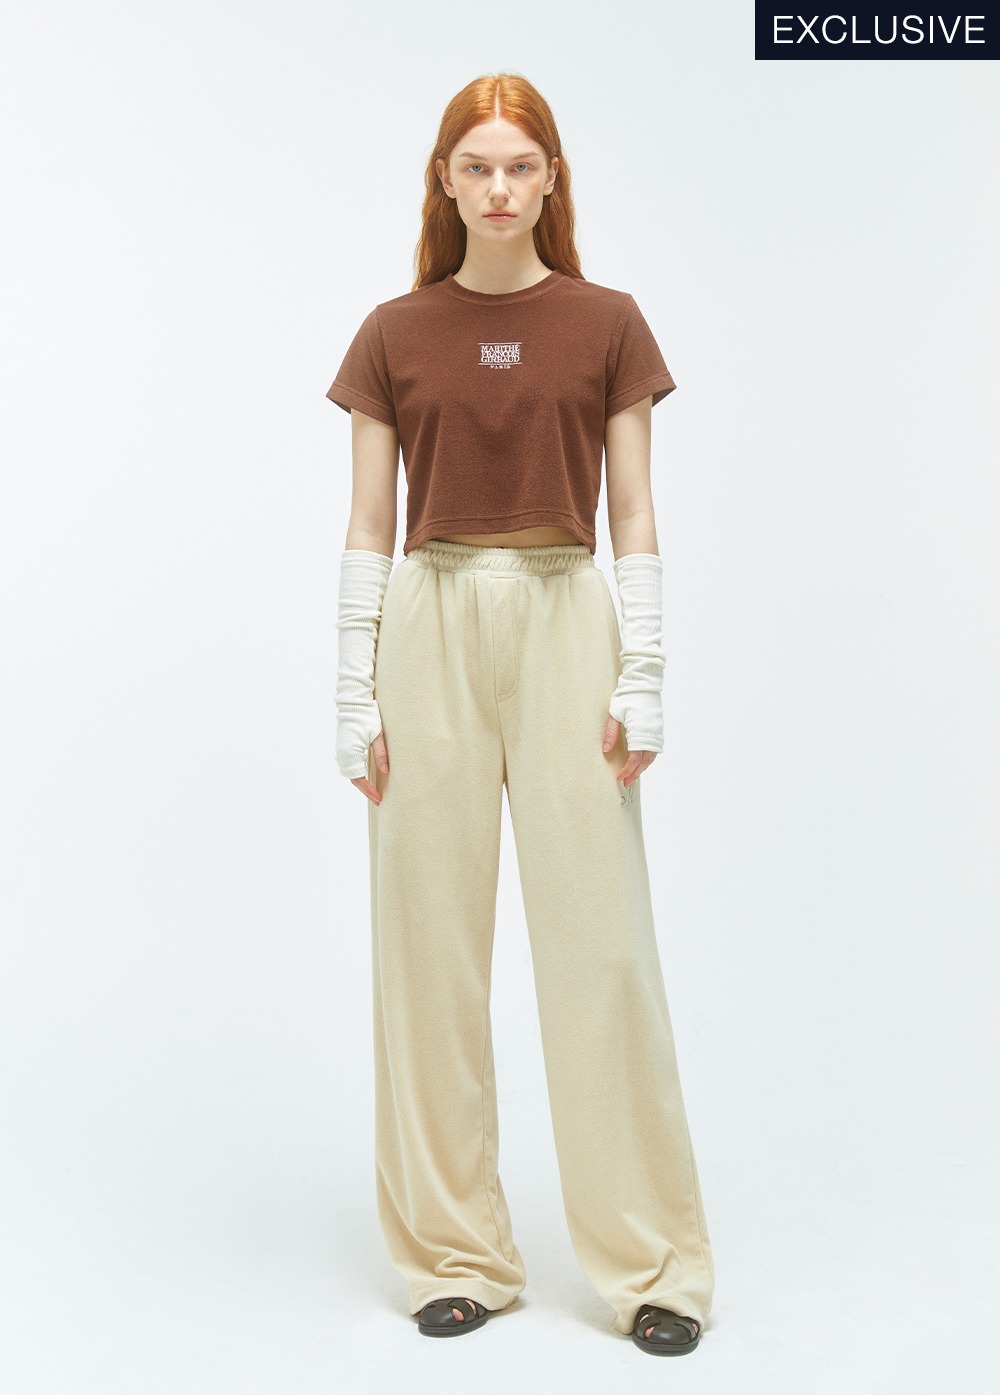 [EXCLUSIVE] W CLASSIC LOGO TERRY CROP TEE brown